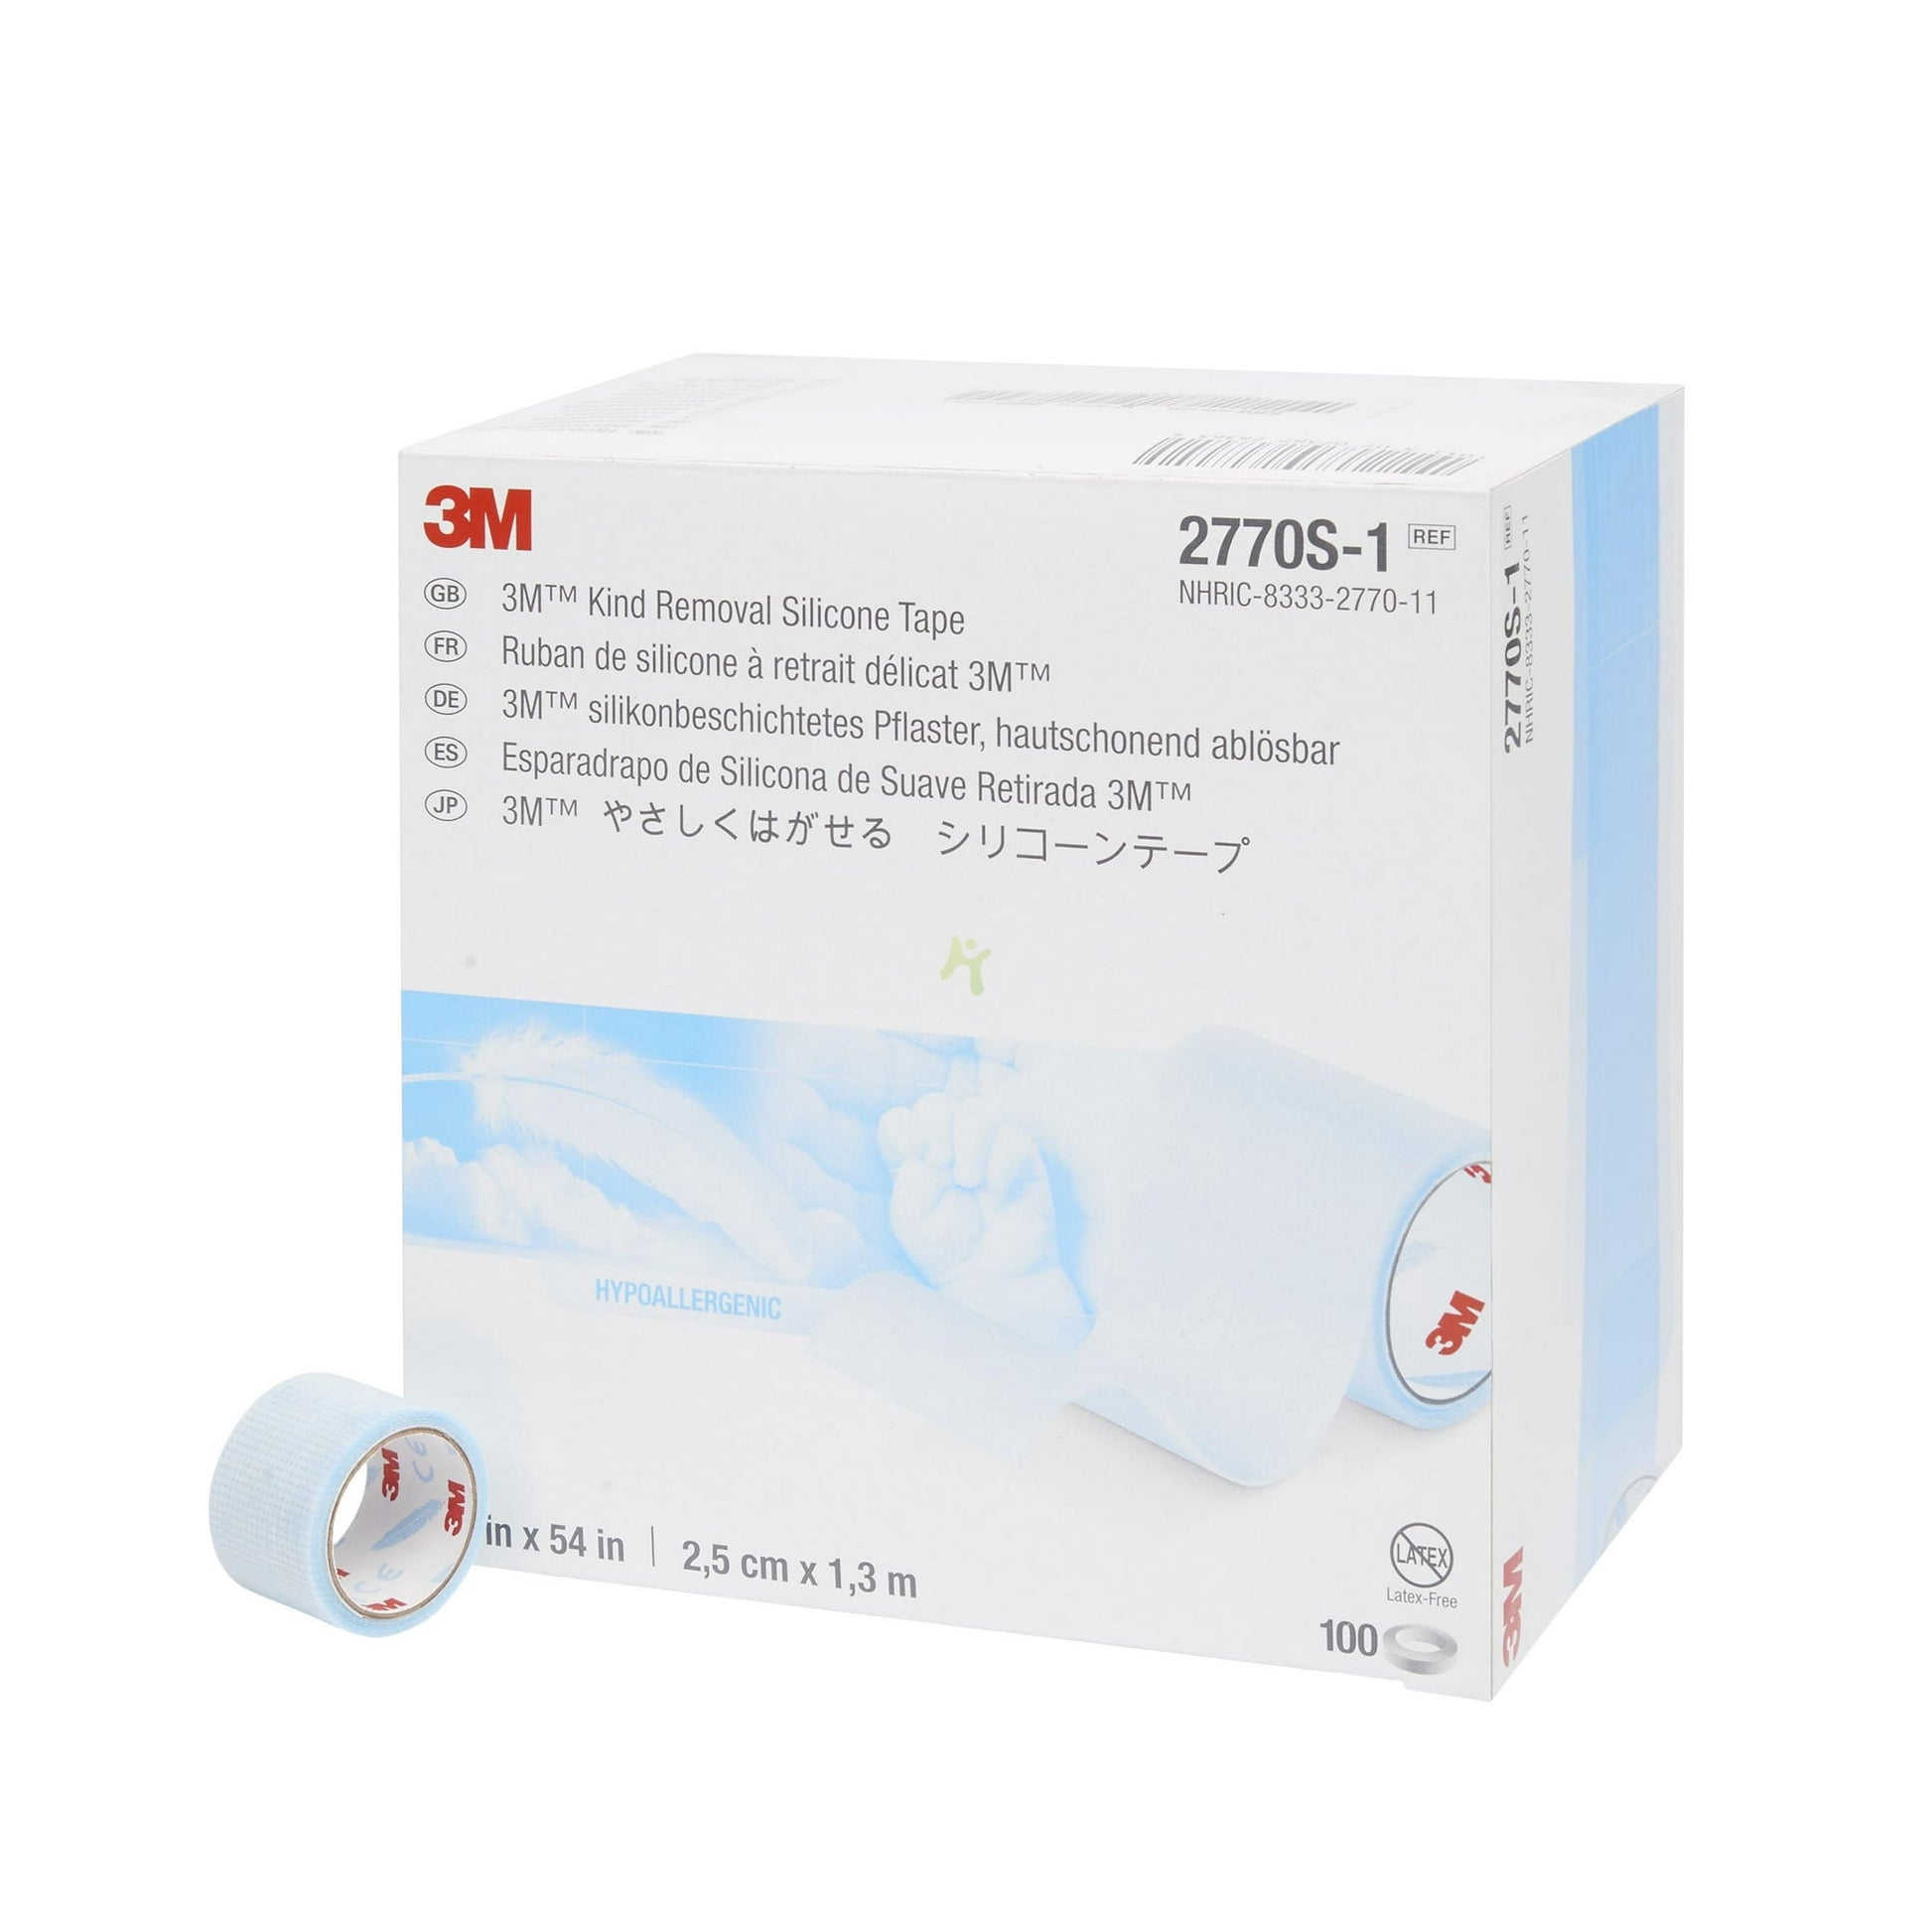 3M Micropore S Surgical Tape, Single-patient use roll, 1" x 1.5 yds.